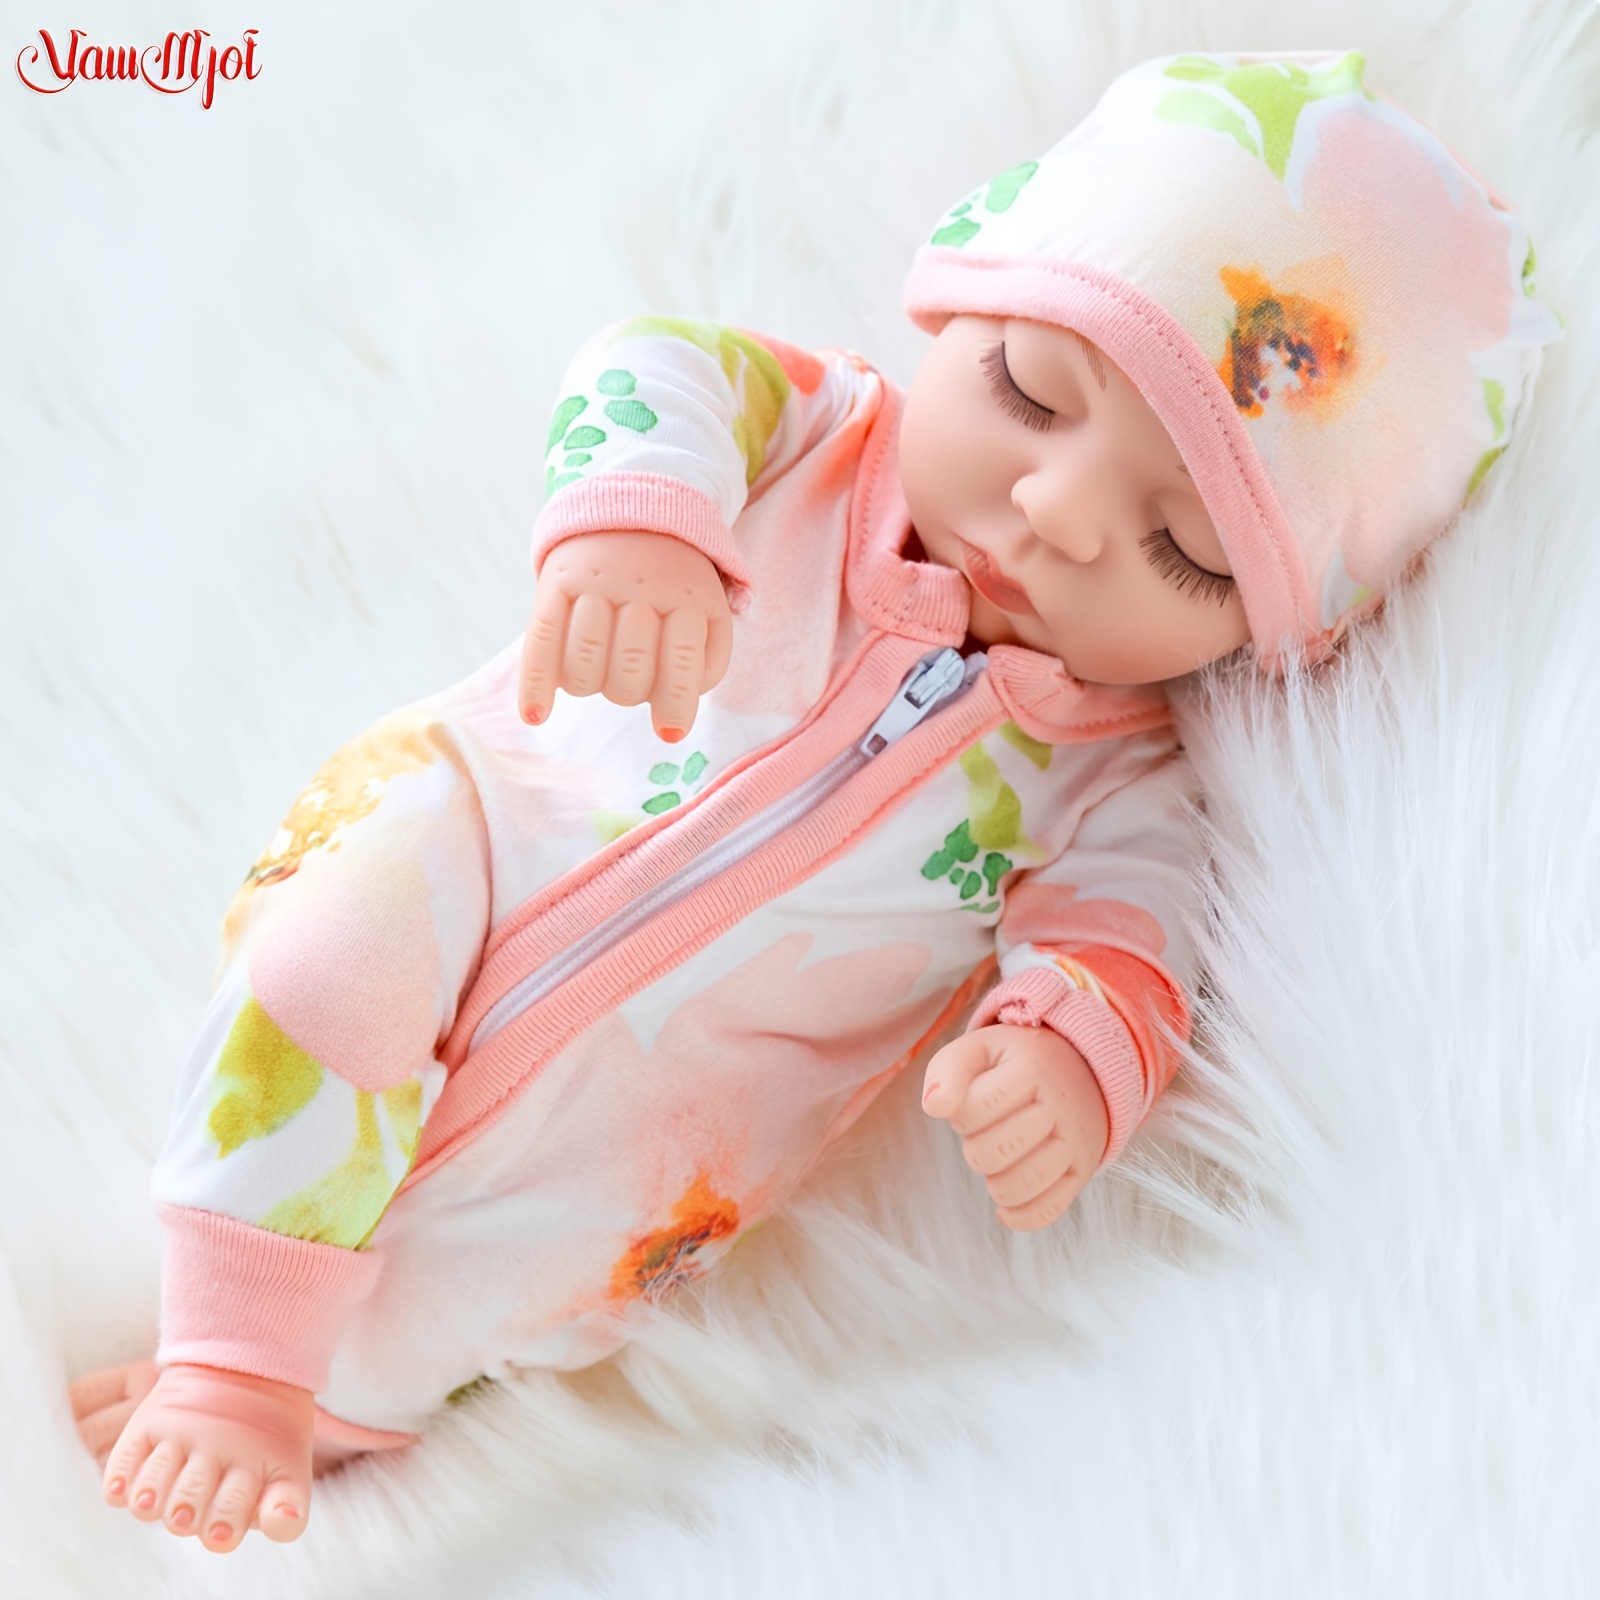 

10 Inch Newborn Reborn Baby Doll And Clothes Set Washable Realistic Soft Silicone Sleeping Baby Doll With Beautiful Flower Pattern Jumpsuit And Hat-best Gift For Kids Girls